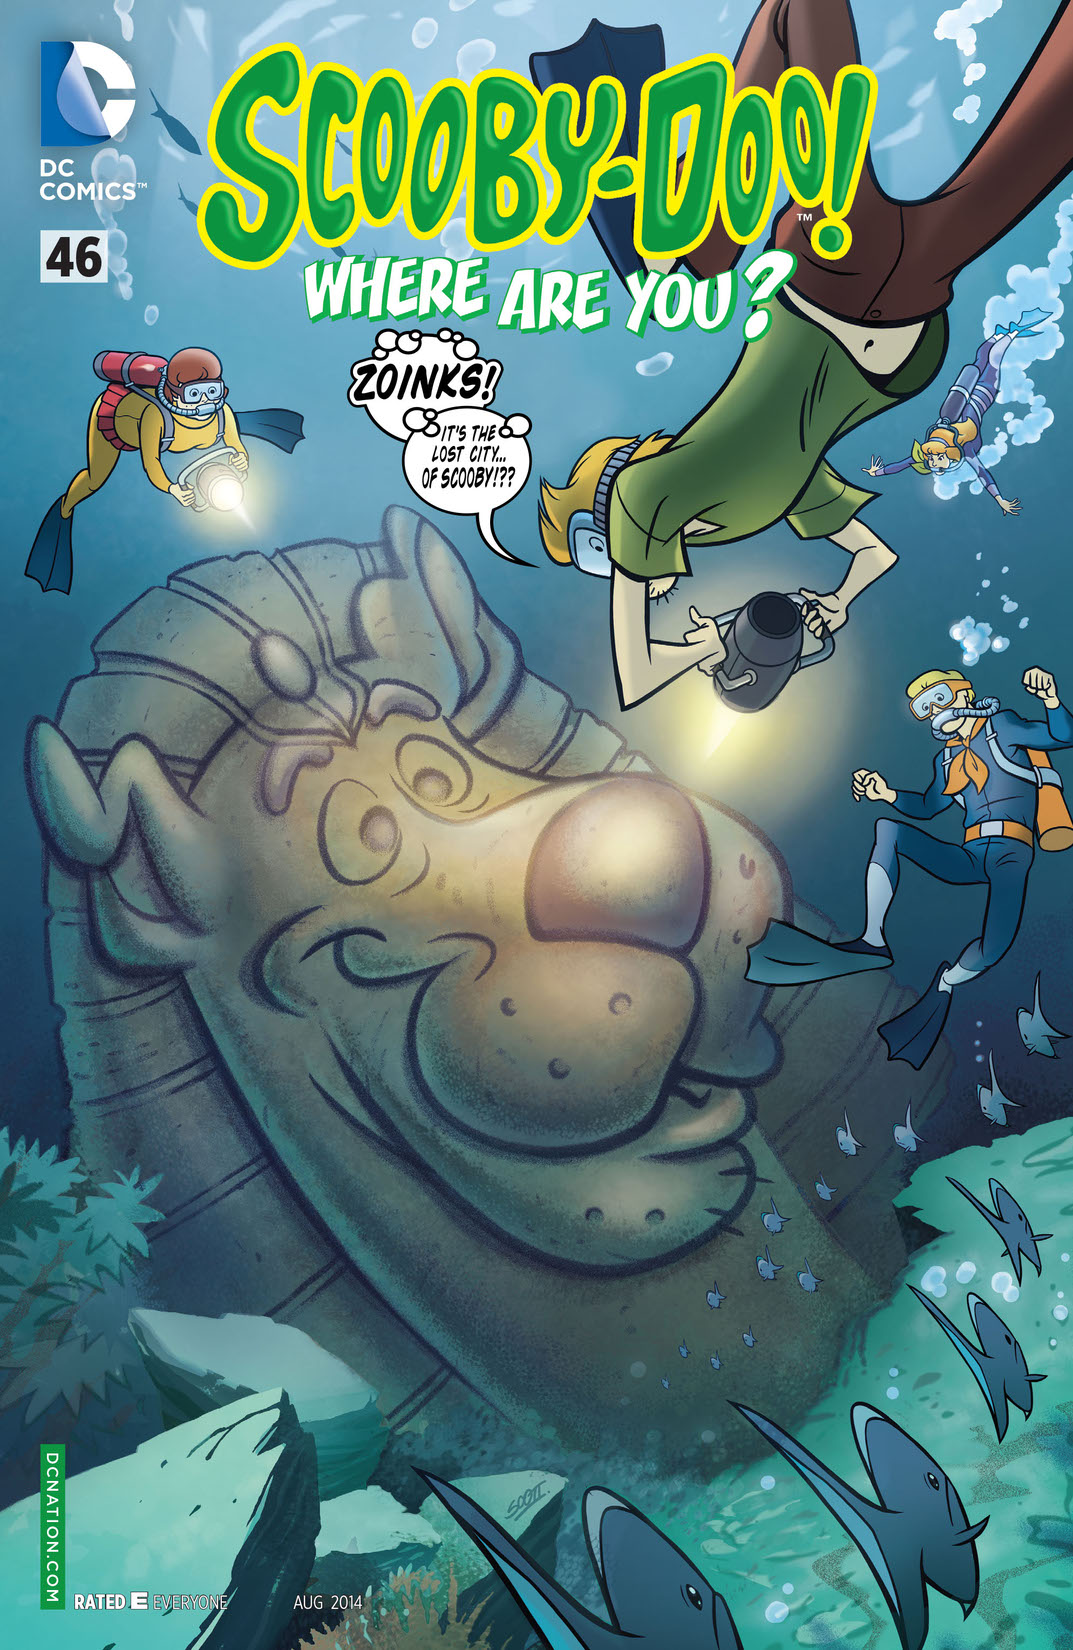 Scooby-Doo, Where Are You? #46 preview images